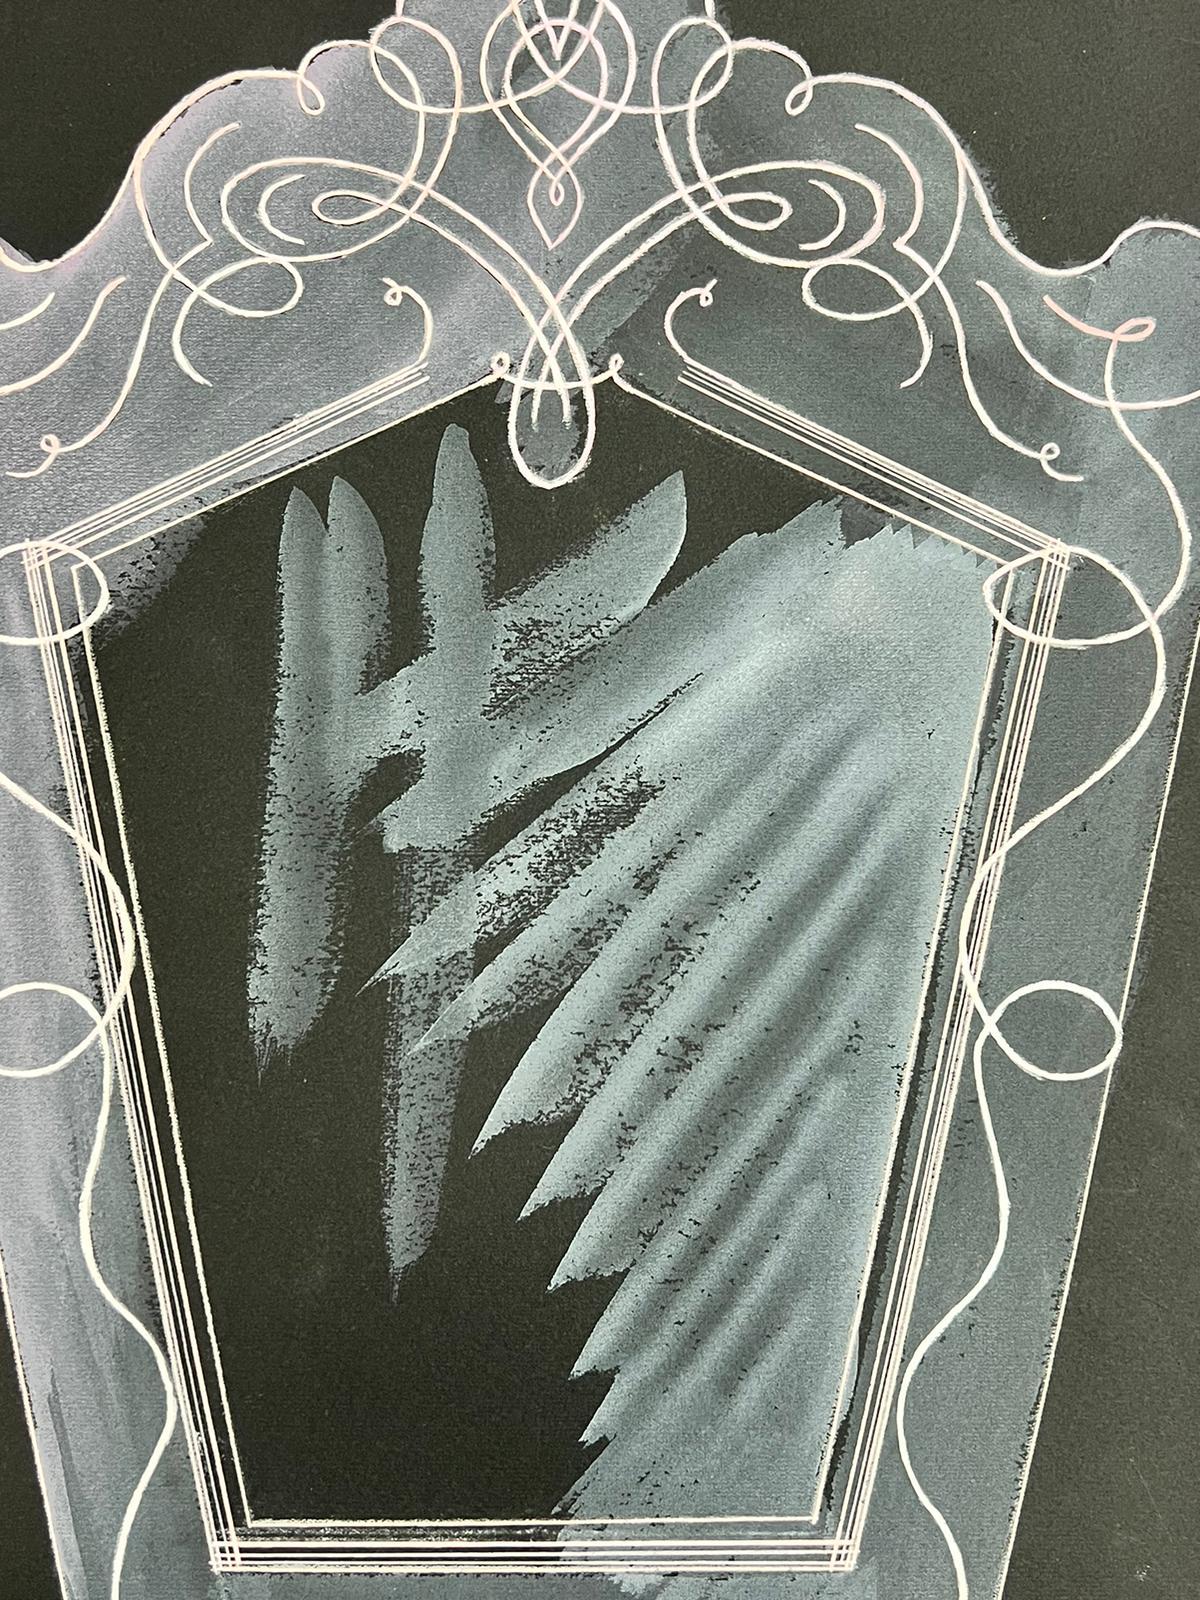 Mid Century French Illustration Sketche Of A Mirror On Black Paper - Post-Impressionist Painting by Josine Vignon